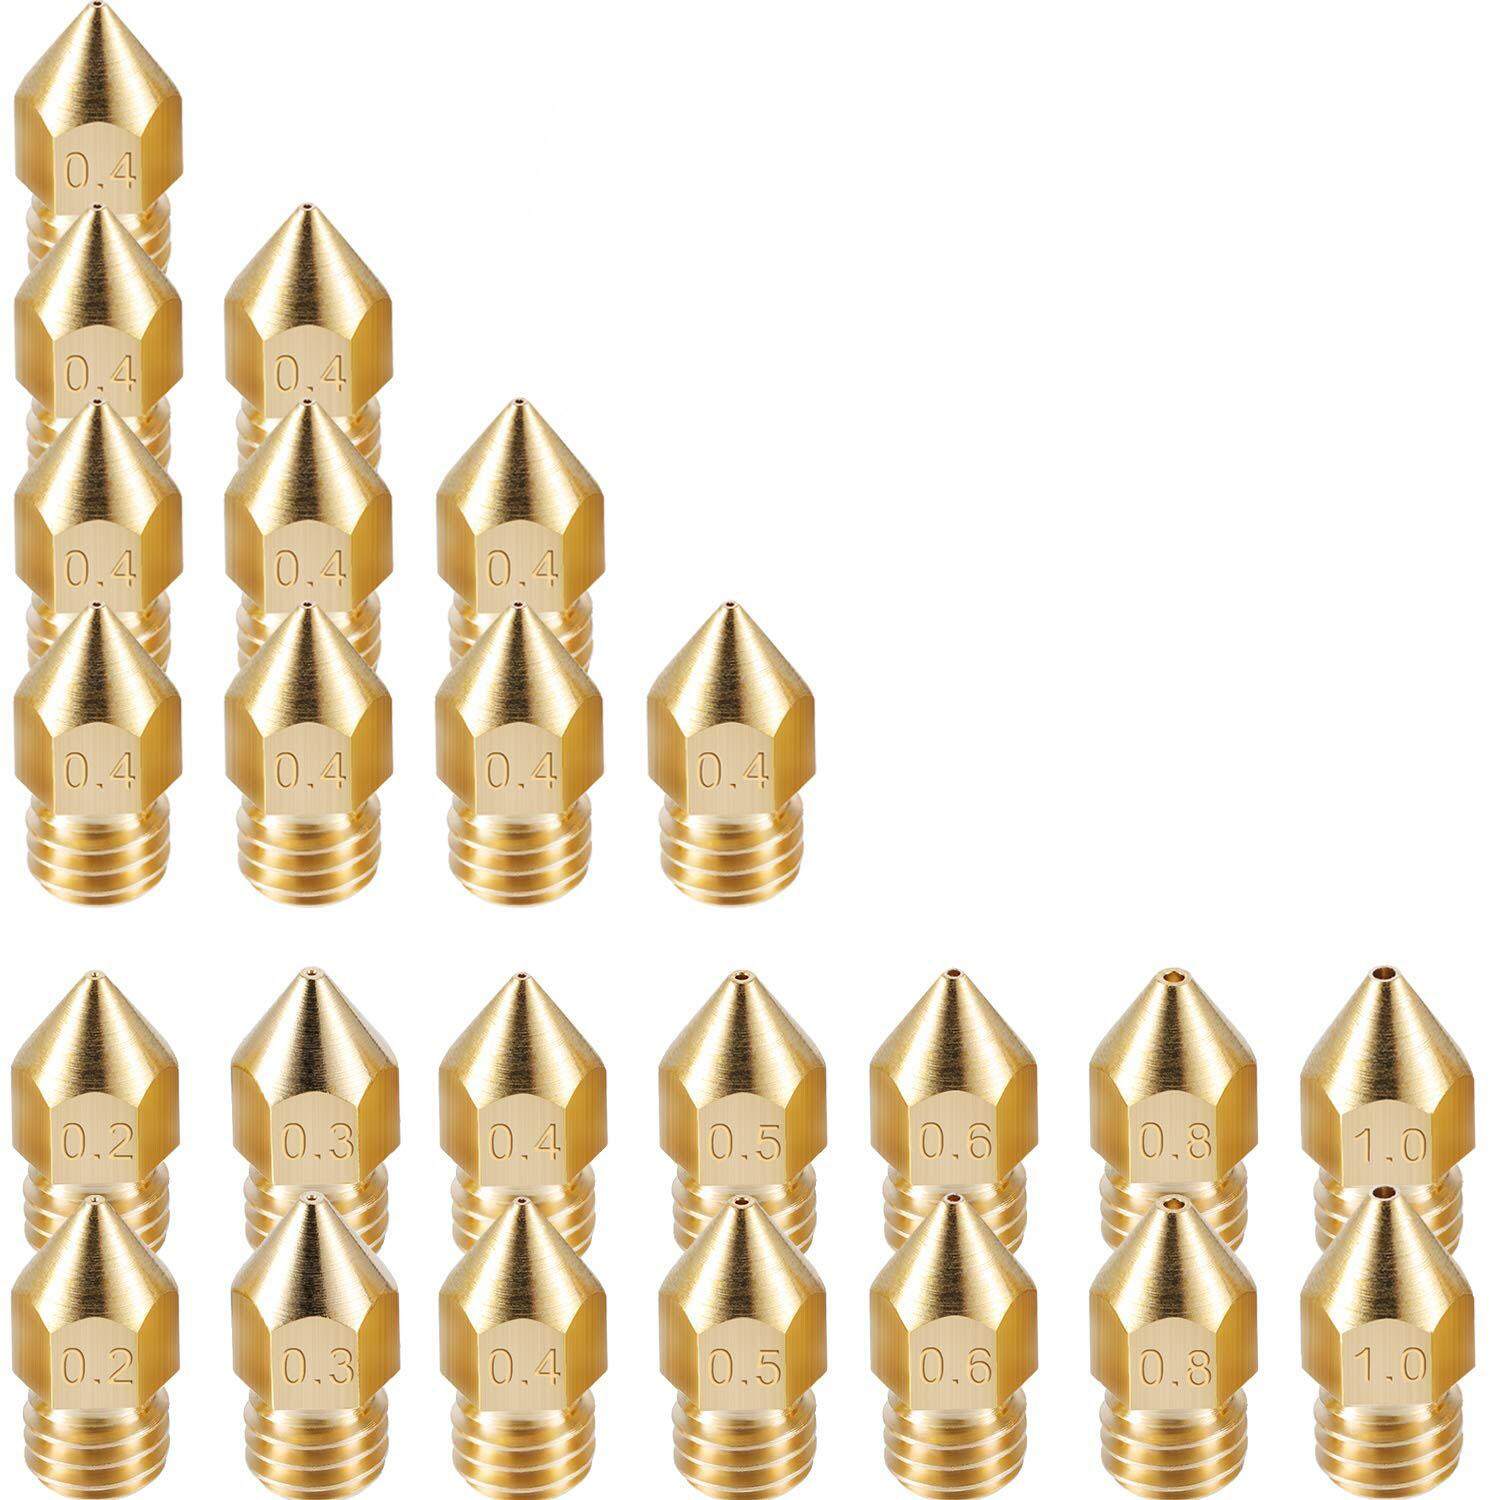 5 pcs NEW  0.4mm Copper Extruder Nozzle M6 for 1.75mm Consumable